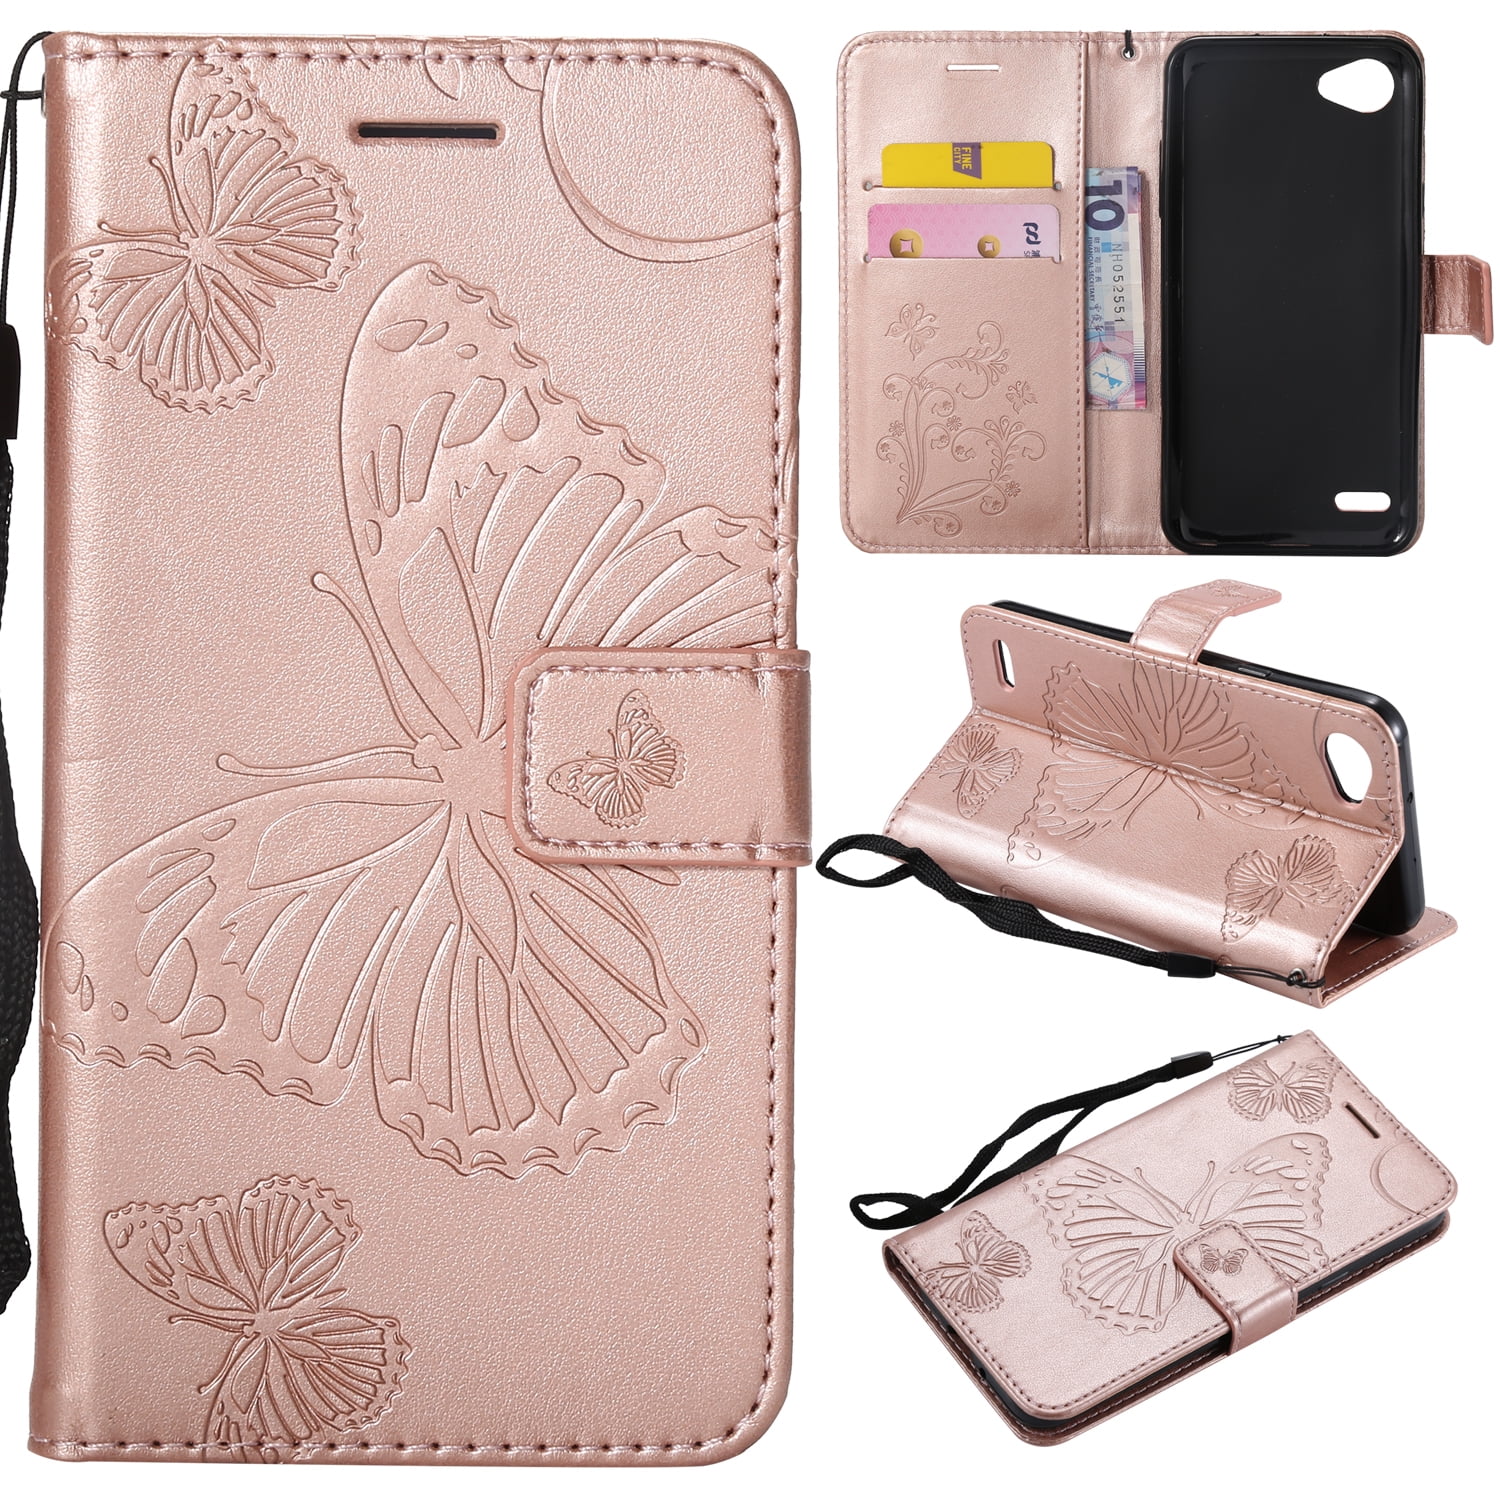 Spritech LG G6 Wallet Case, Card Slot Design Floral 3D Handmade Bling Crystal Diamonds Butterfly with Card Slots Folio Stand PU Leather Wallet for LG G6/LG G6 Plus 